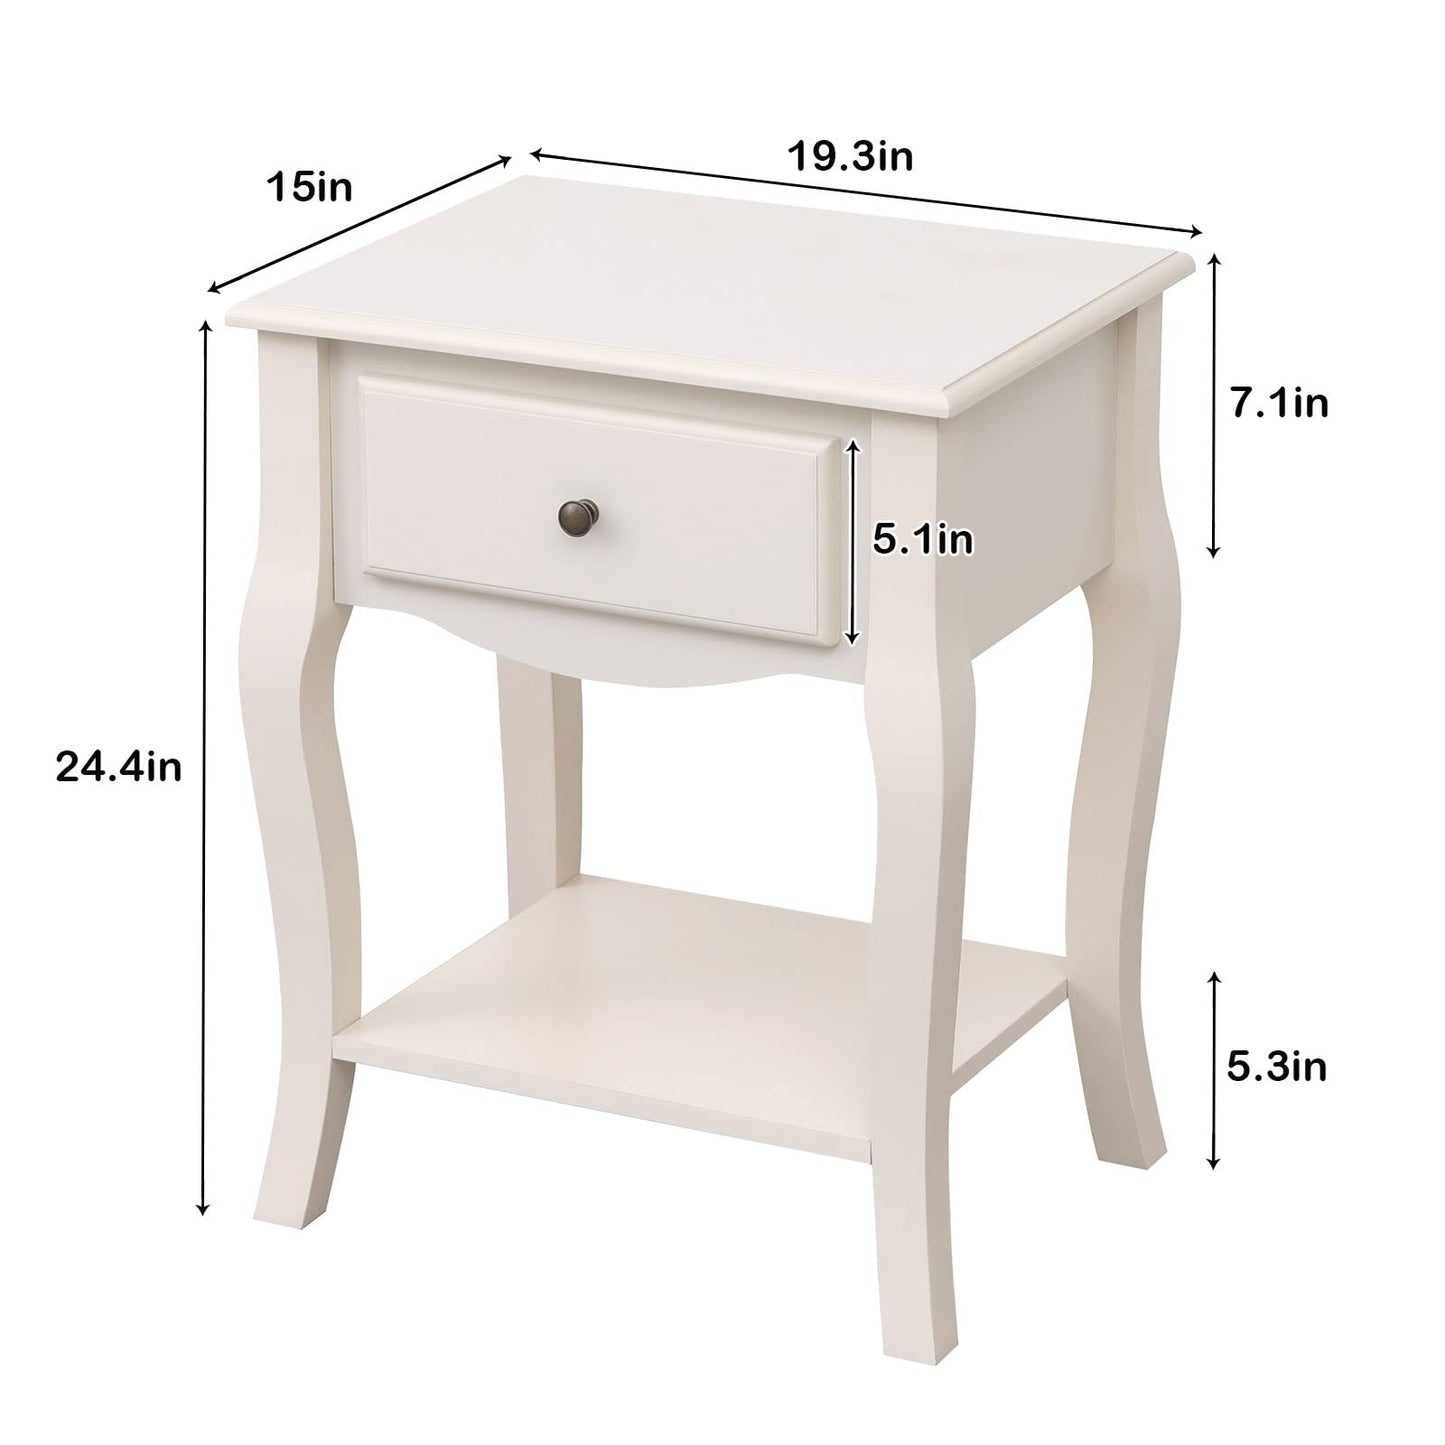 SogesHome Wooden Nightstand End Table with Drawer Sofa Side Table Bedside Lamp Table Accent Table for Living Room Bedroom, White